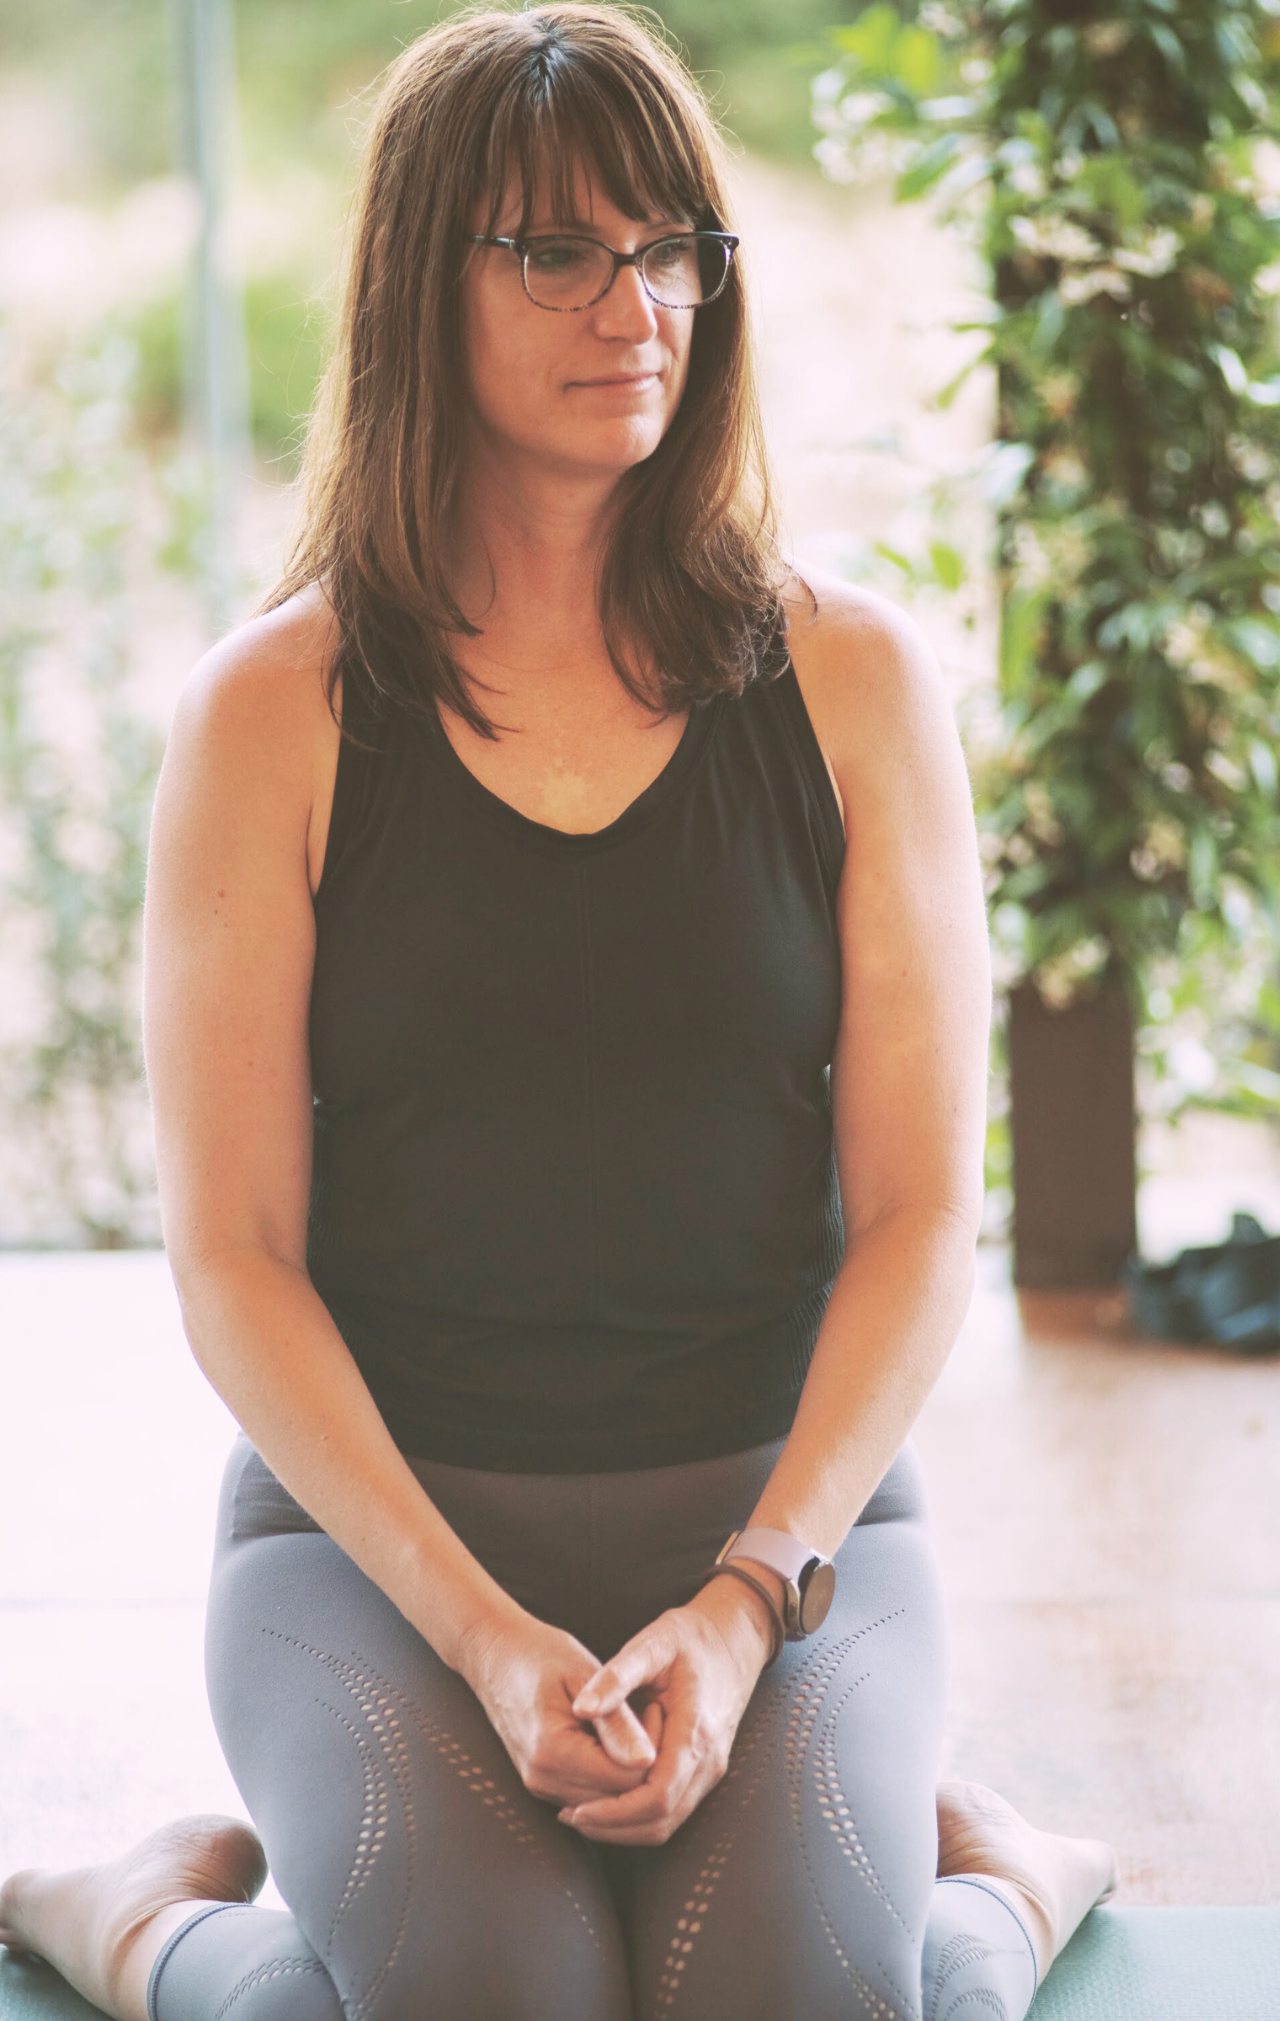 Yin Yoga Podcast with Mandy Ryle 